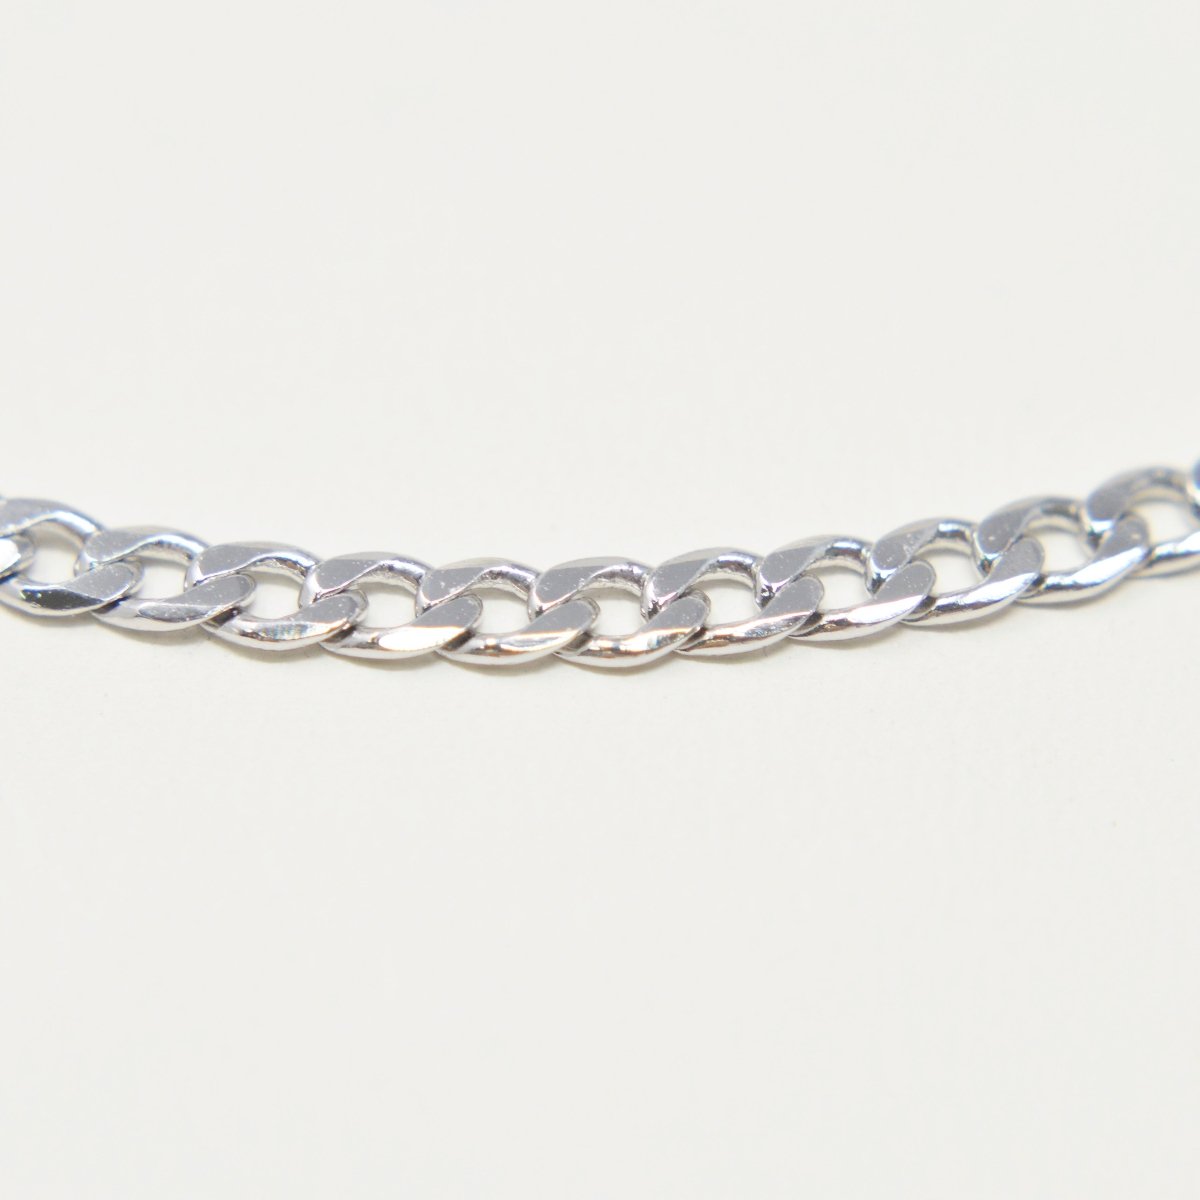 17.5 inch Silver Miami Cuban Curb Chain Necklace, White Gold Filled Curb Finished Necklace, 2.5mm Curb Necklace w/ Spring Ring | CN-1013 Clearance Pricing - DLUXCA